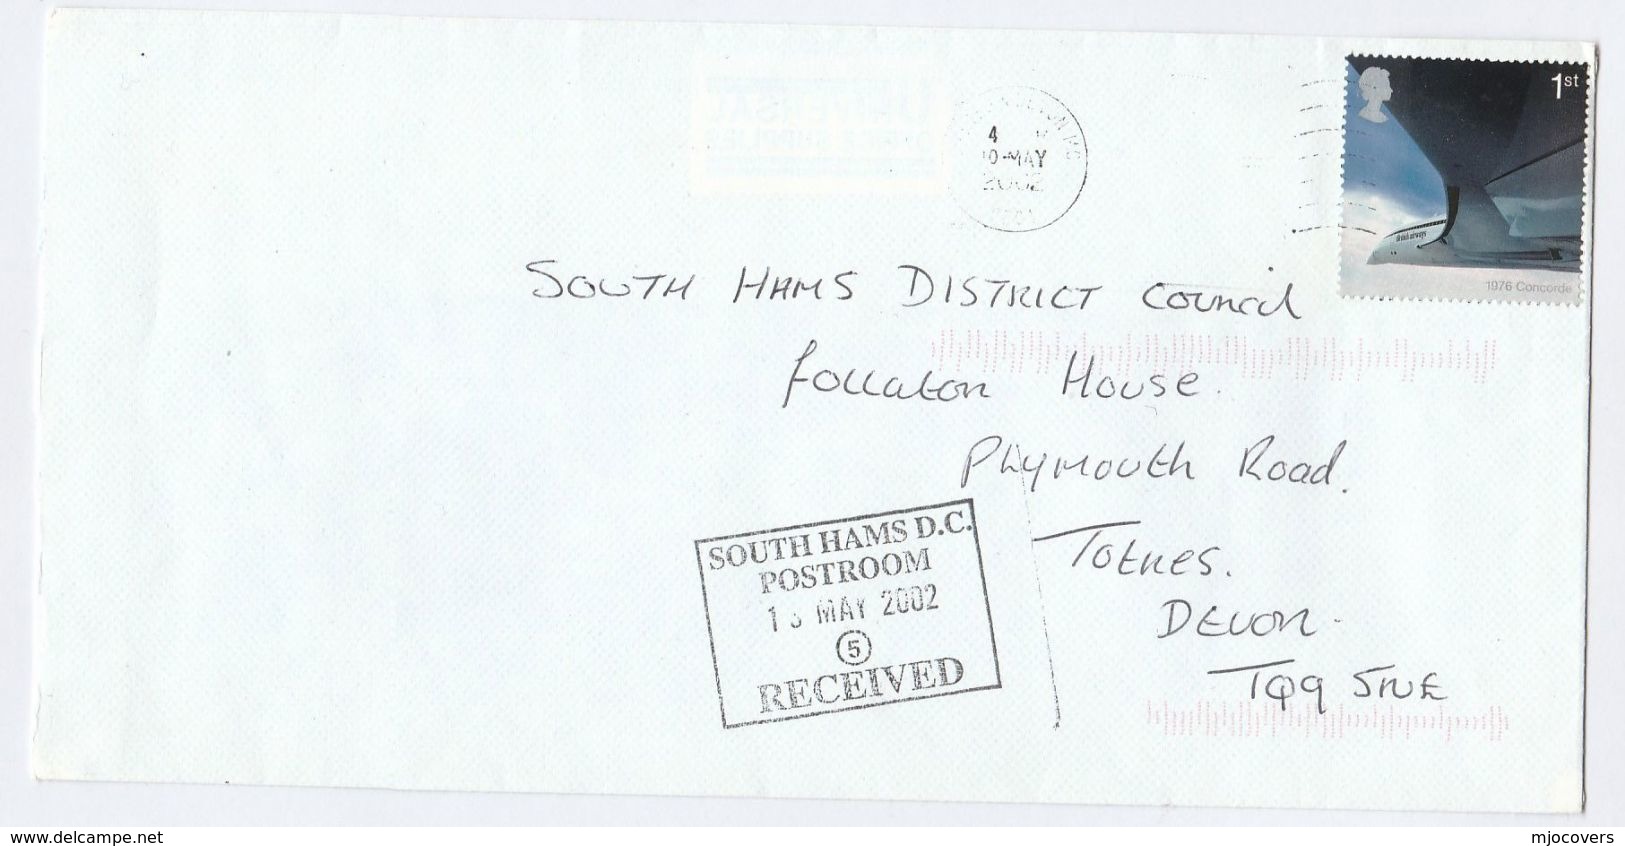 2002 GB  CONCORDE Stamps COVER Cachet SOUTH HAMS DC POSTROOM RECEIVED  District Council  Aviation - Airplanes